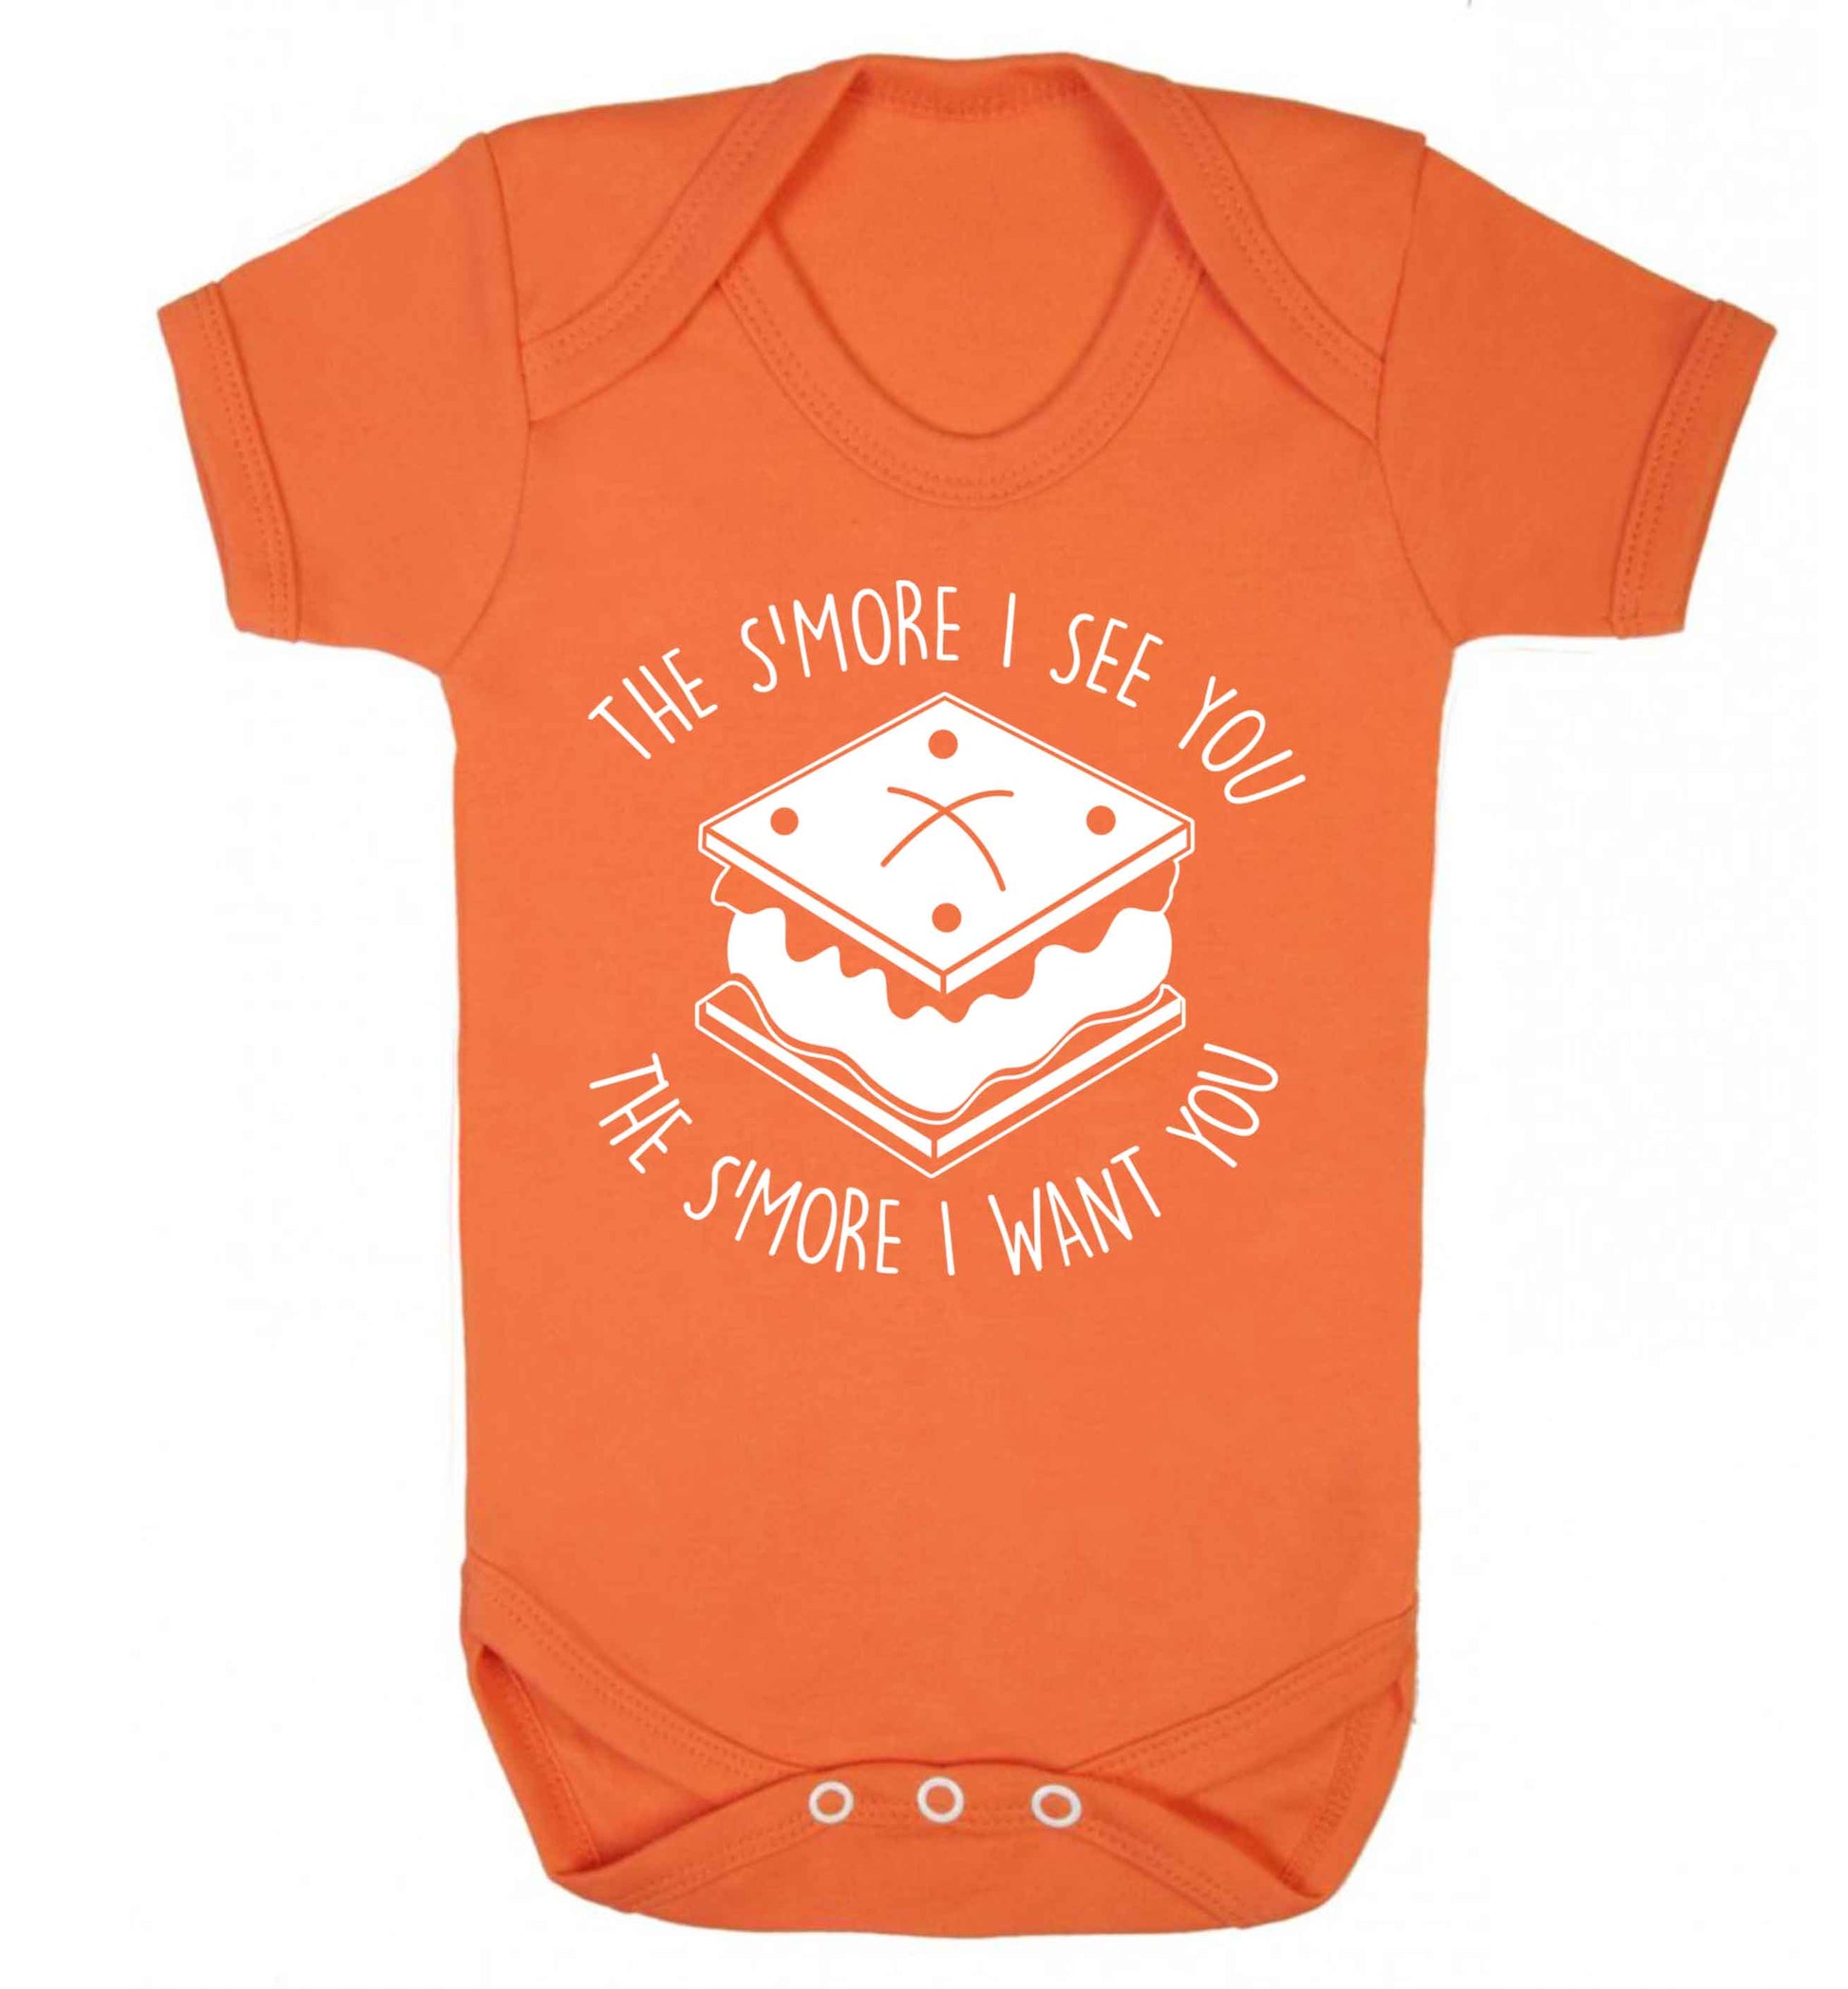 The s'more I see you the s'more I want you Baby Vest orange 18-24 months